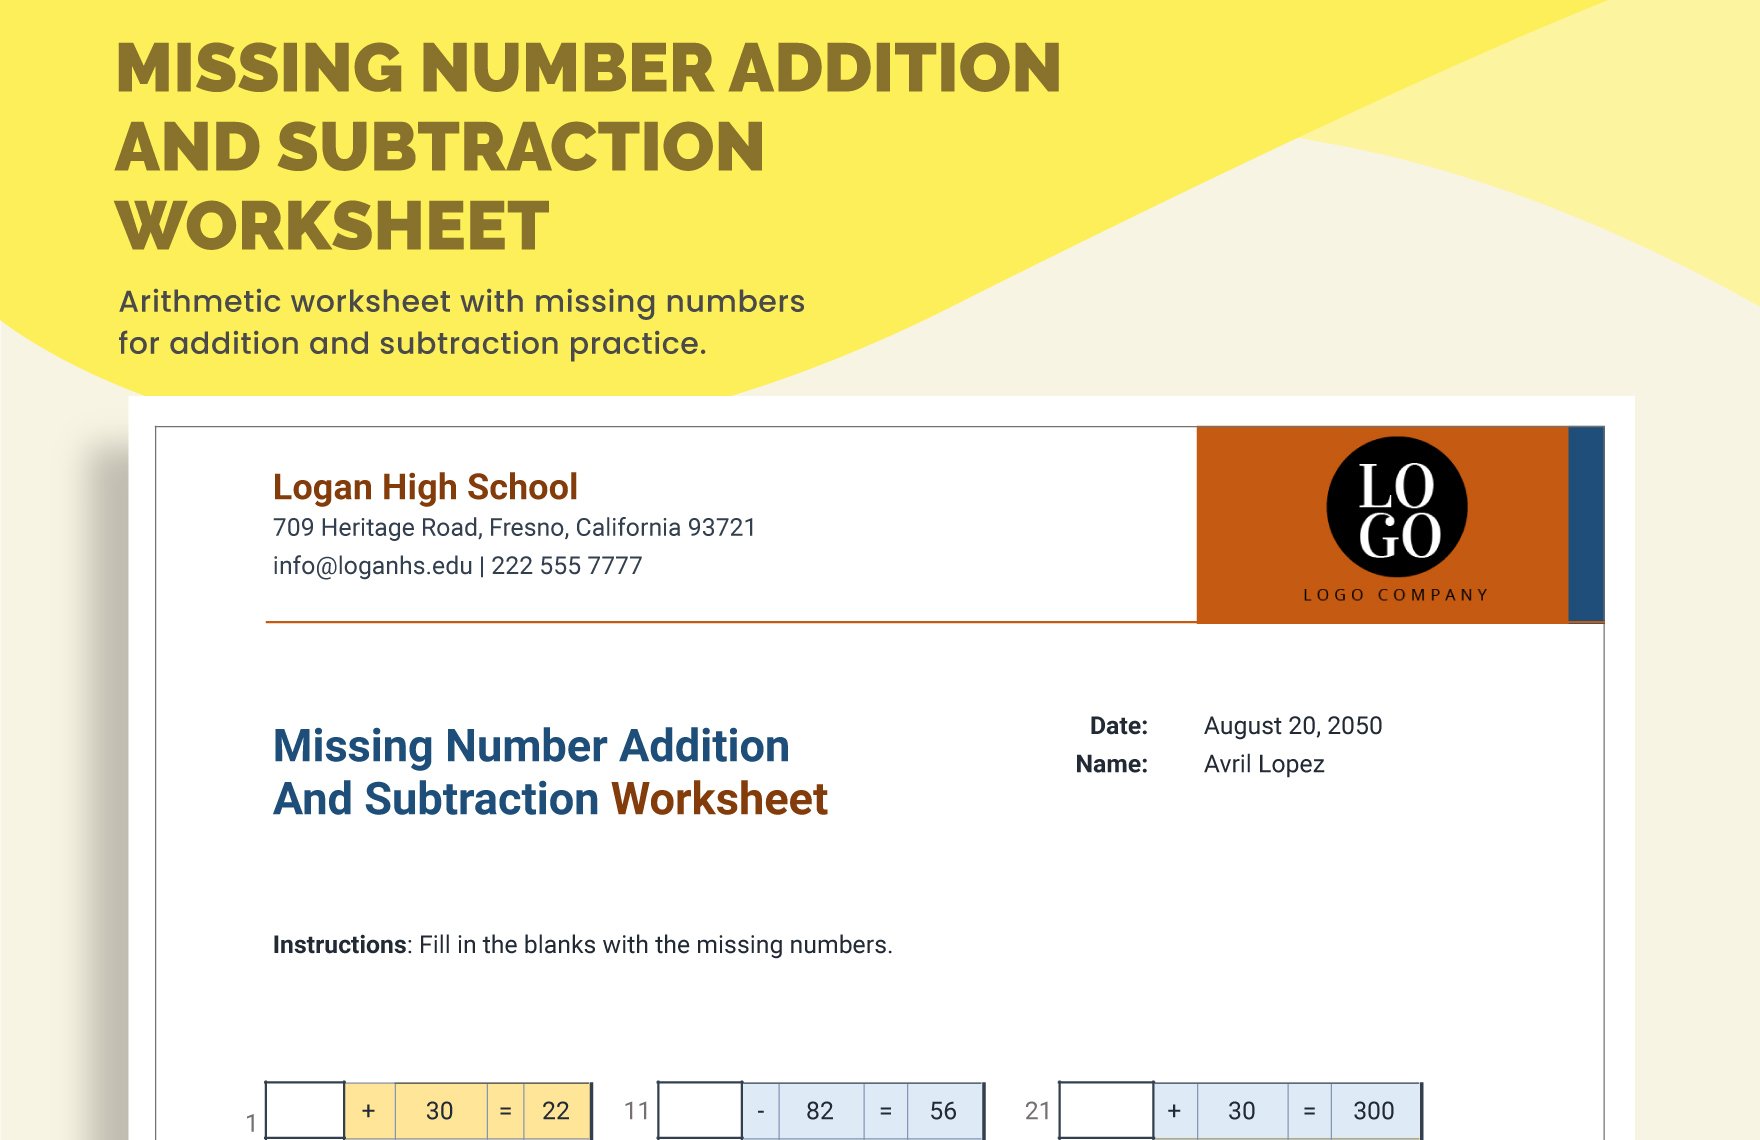 Missing Number Addition And Subtraction Worksheet